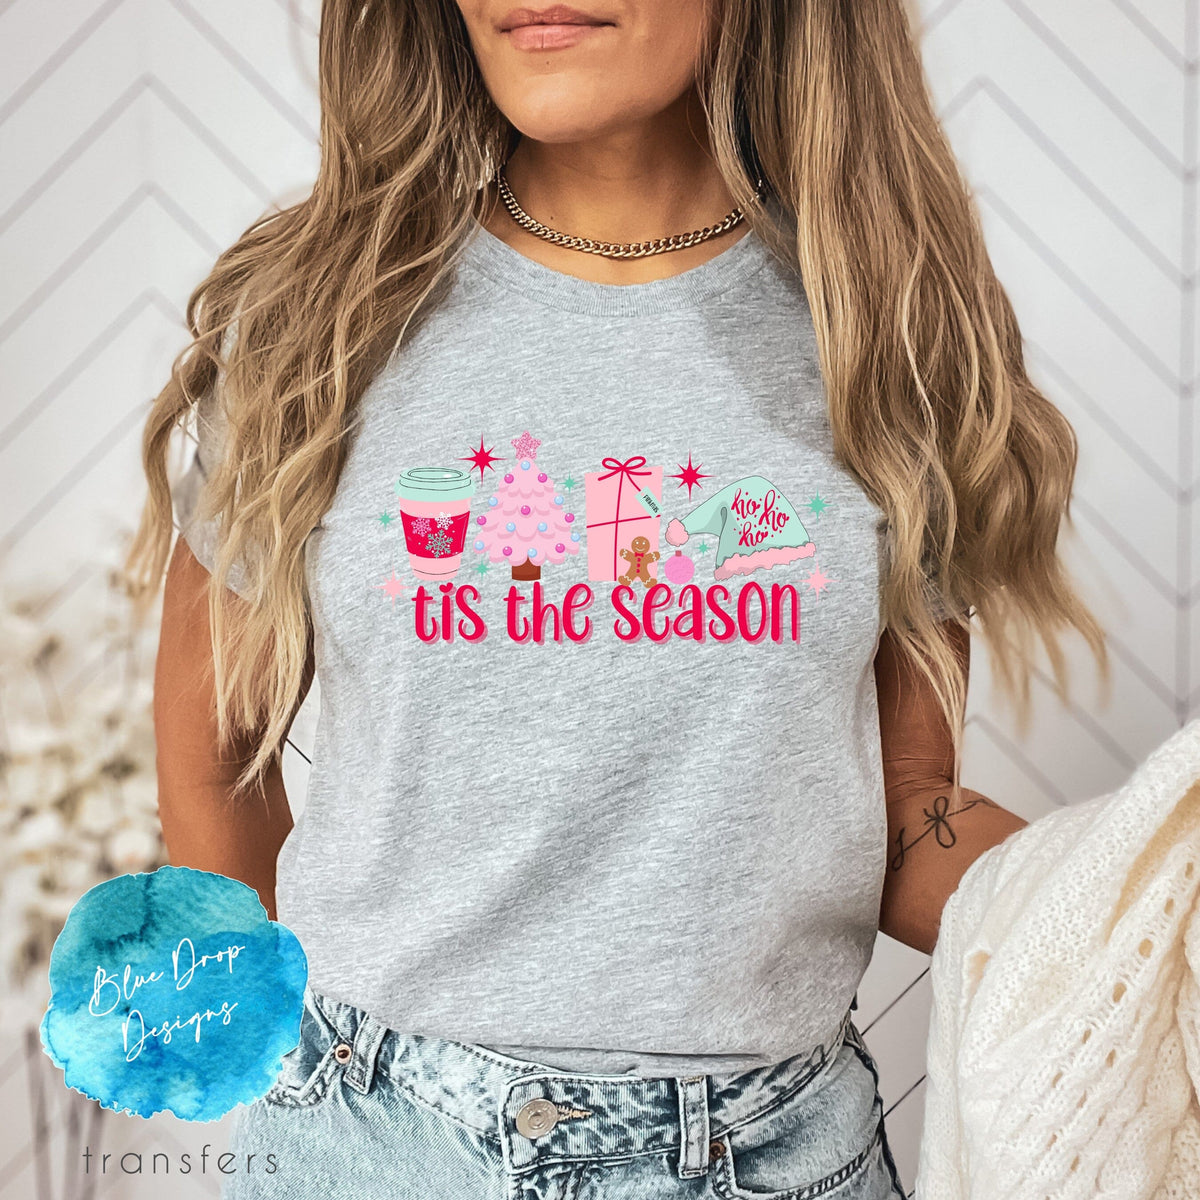 Tis The Season Pink Full Color Transfer Direct to Film Colour Transfer Blue Drop Designs 